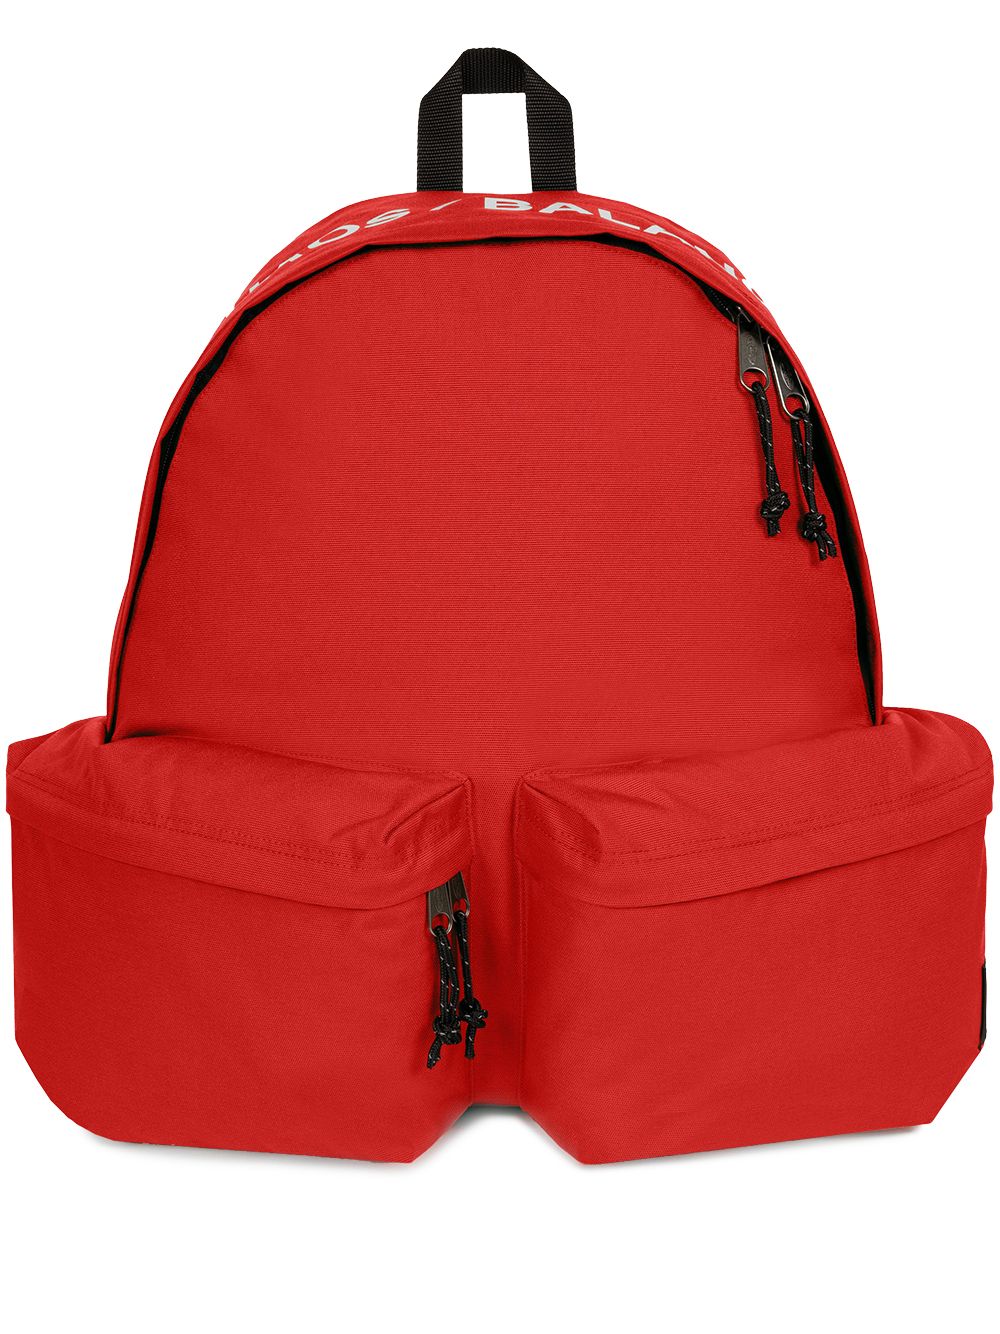 Eastpak x UNDERCOVER padded packpack - Red von Eastpak